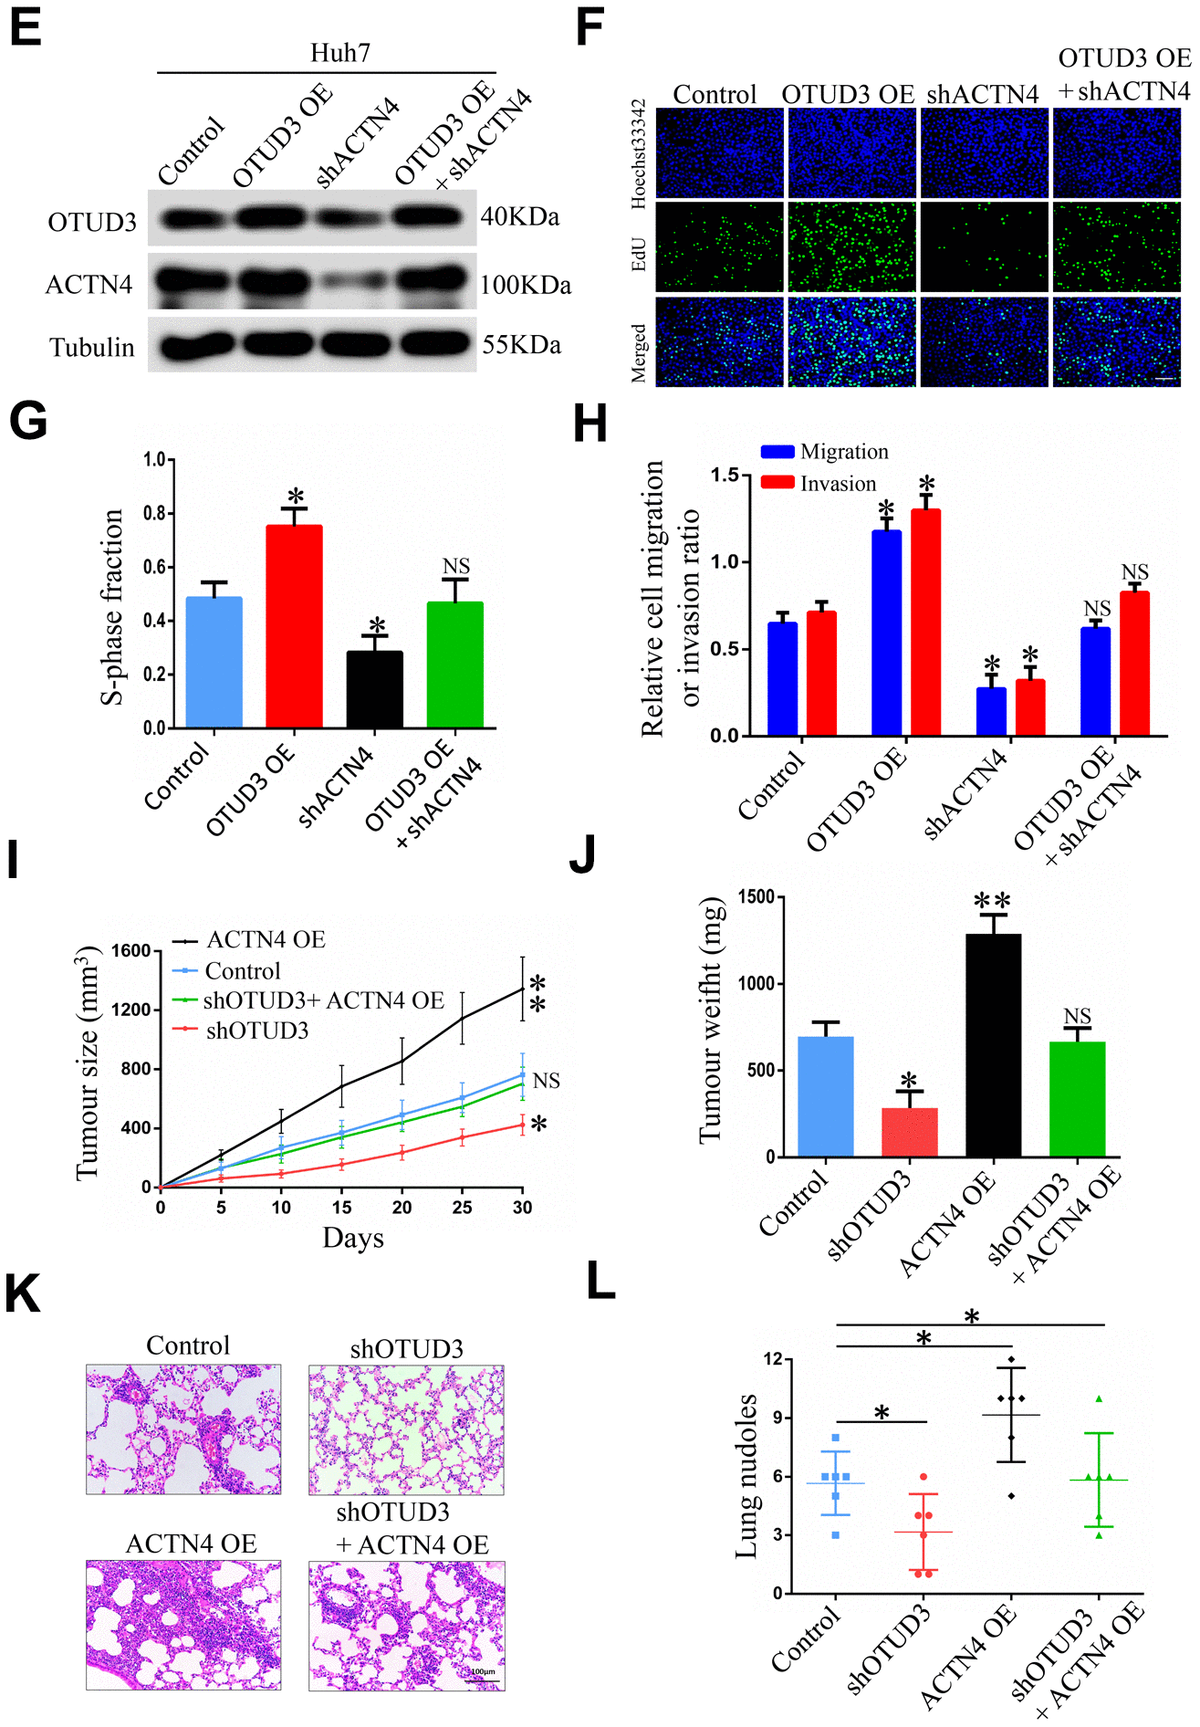 ACTN4 is critical for OTUD3-mediated HCC cells progression in vitro and in vivo. (E) Western blot showing the overexpression of OTUD3 rescued the decreased ACTN4 protein level caused by ACTN4 knockdown. (F, G) EdU assay identifying the effect of OTUD3 upregulation on inhibited HCC cell growth caused by ACTN4 downregulation. (H) Quantification of HCC cell transwell migration and invasion results. (I, J) Tumor sizes and tumor weights of 24 nude mice (6 mice per group) were measured and corresponding tumor growth curves were obtained in the rescue experiments. (K, L) In vivo lung metastasis rescue experiment was examined in 24 nude mice (6 mice per group). Representative H&E staining of lungs are shown (Scale bar: 100μm; magnification: 200X), along with the number of lung metastases in the four groups of nude mice. The unpaired two-sided Student’s t test was used for comparing between two groups of equal variances. Error bars represent mean ± SD from three independent experiments. NS: not significant, *PP